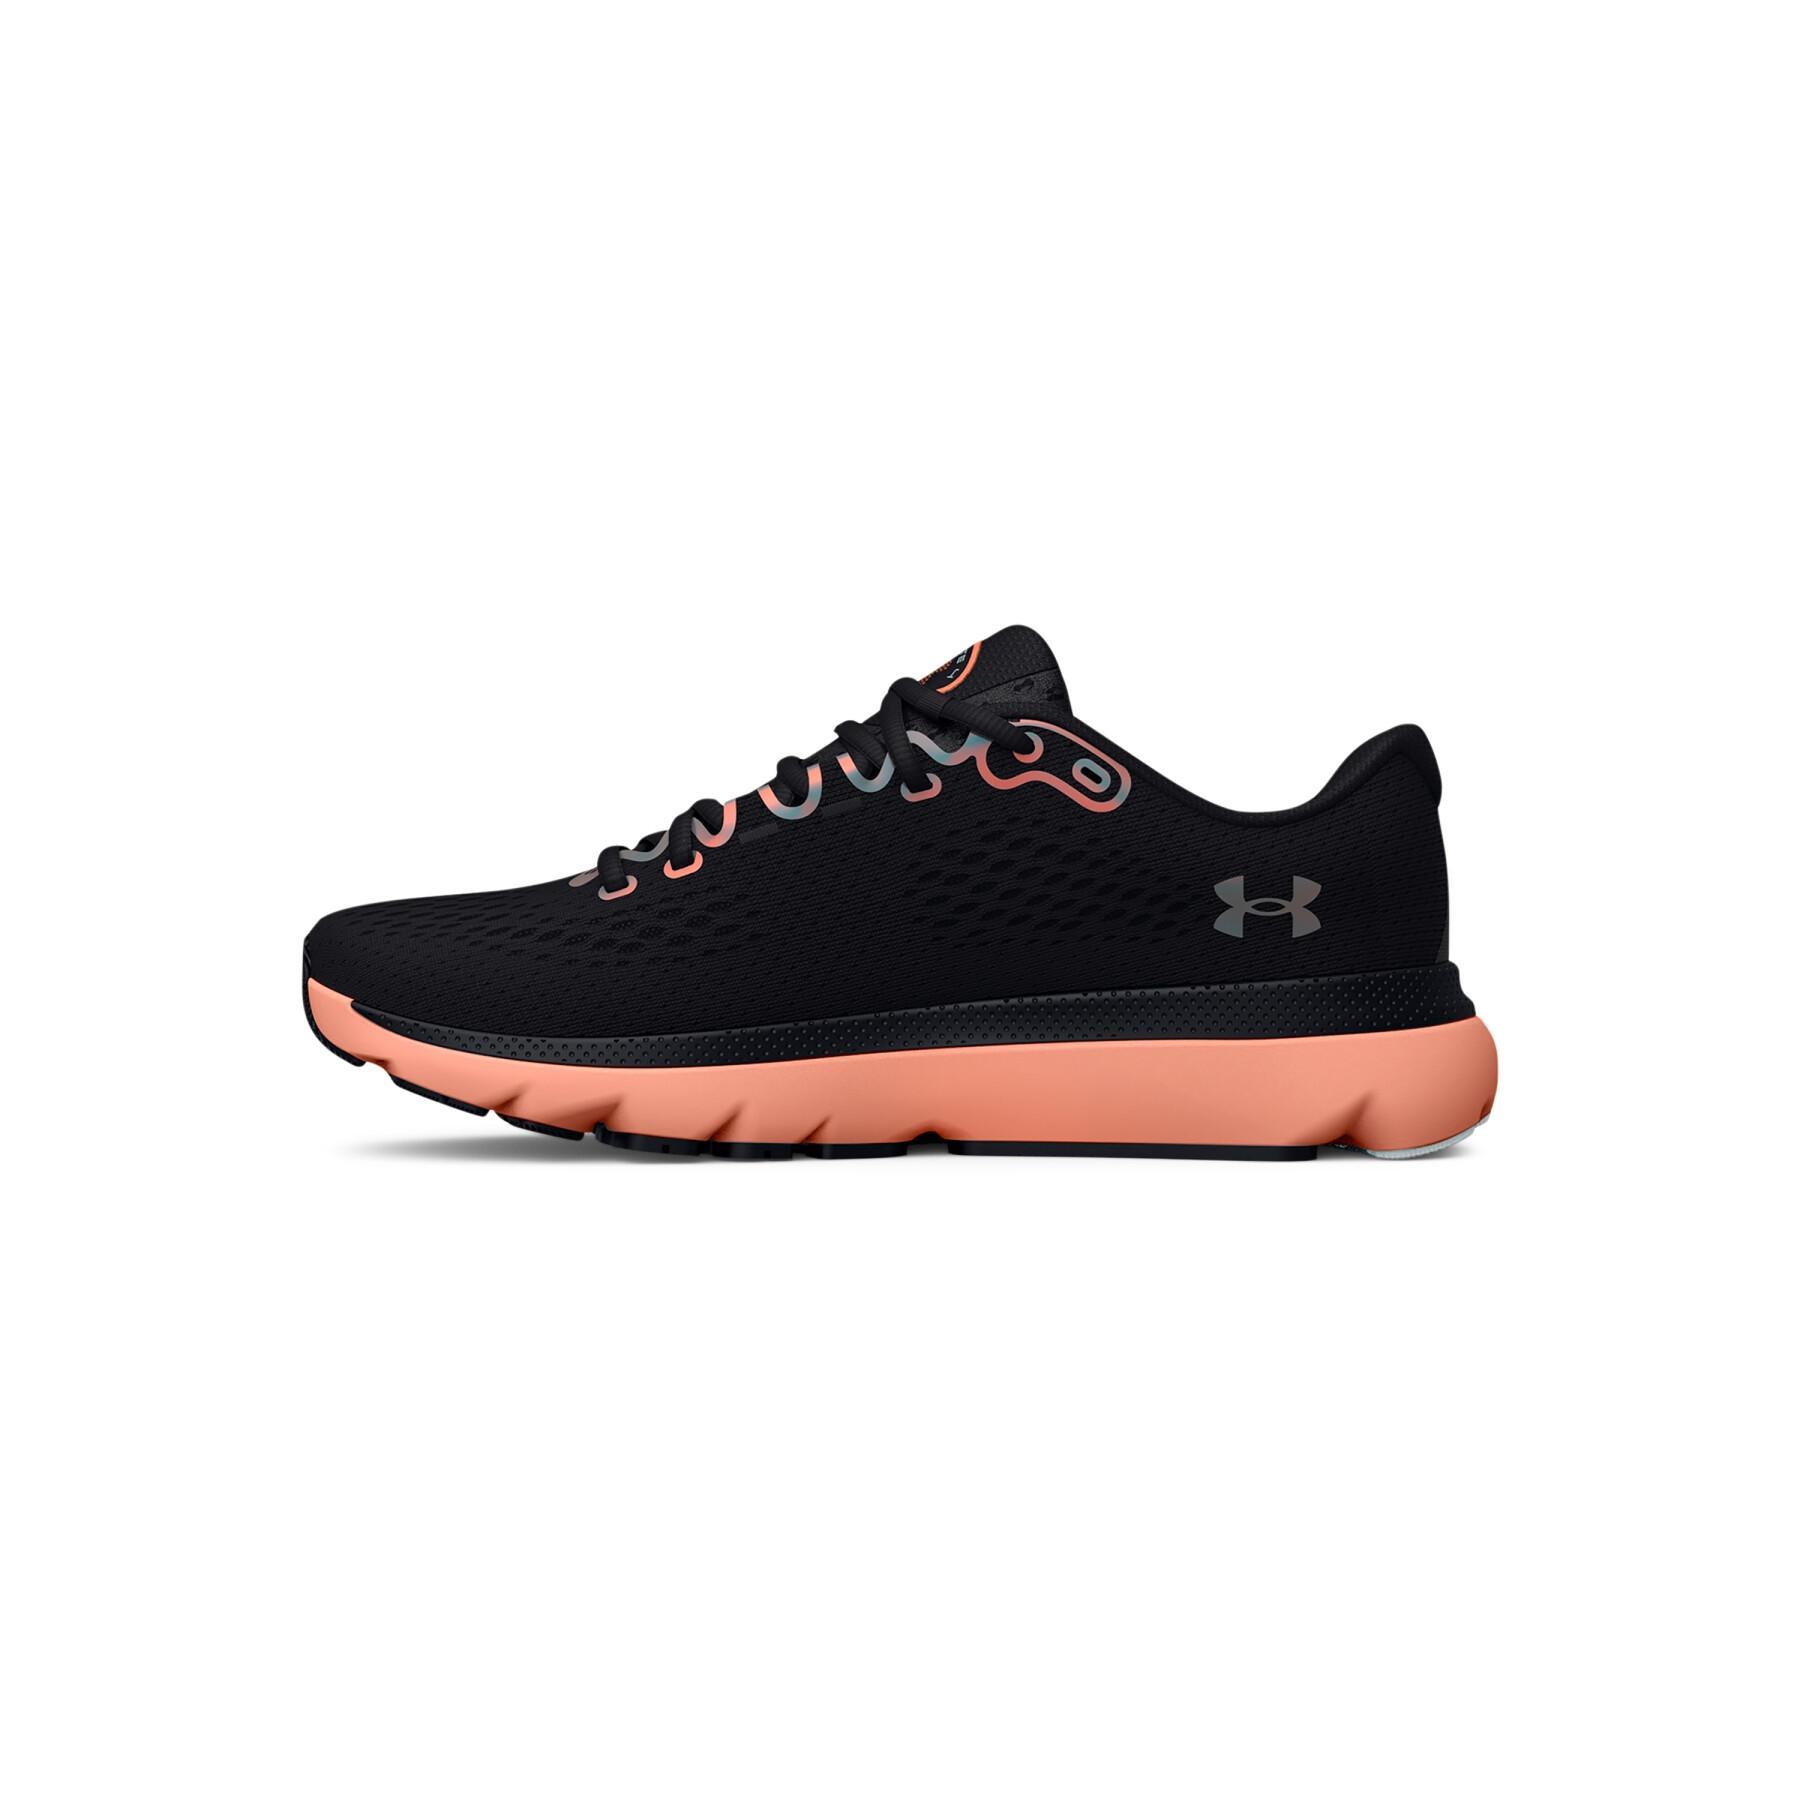 Women's running shoes Under Armour HOVR™ Infinite 4